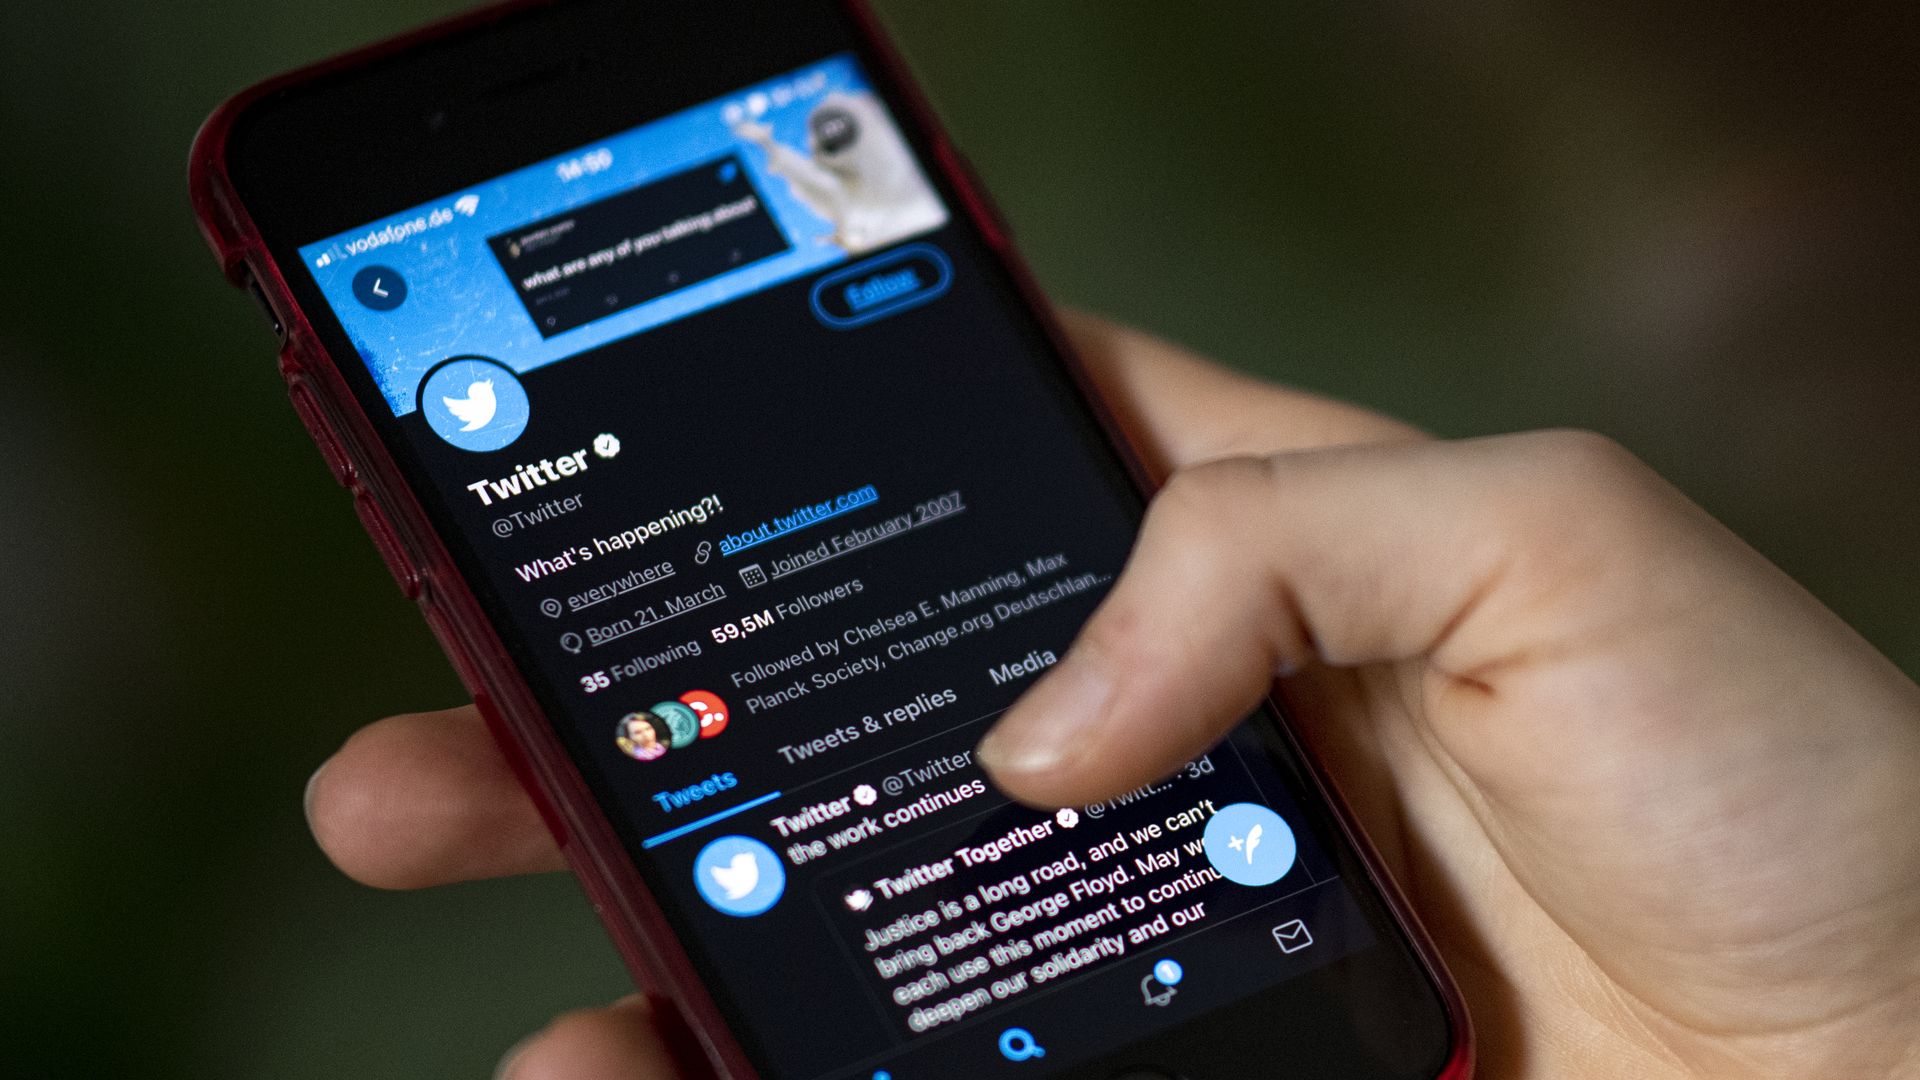 Photo of a hand holding a phone that shows the Twitter profile in the iOS Twitter app